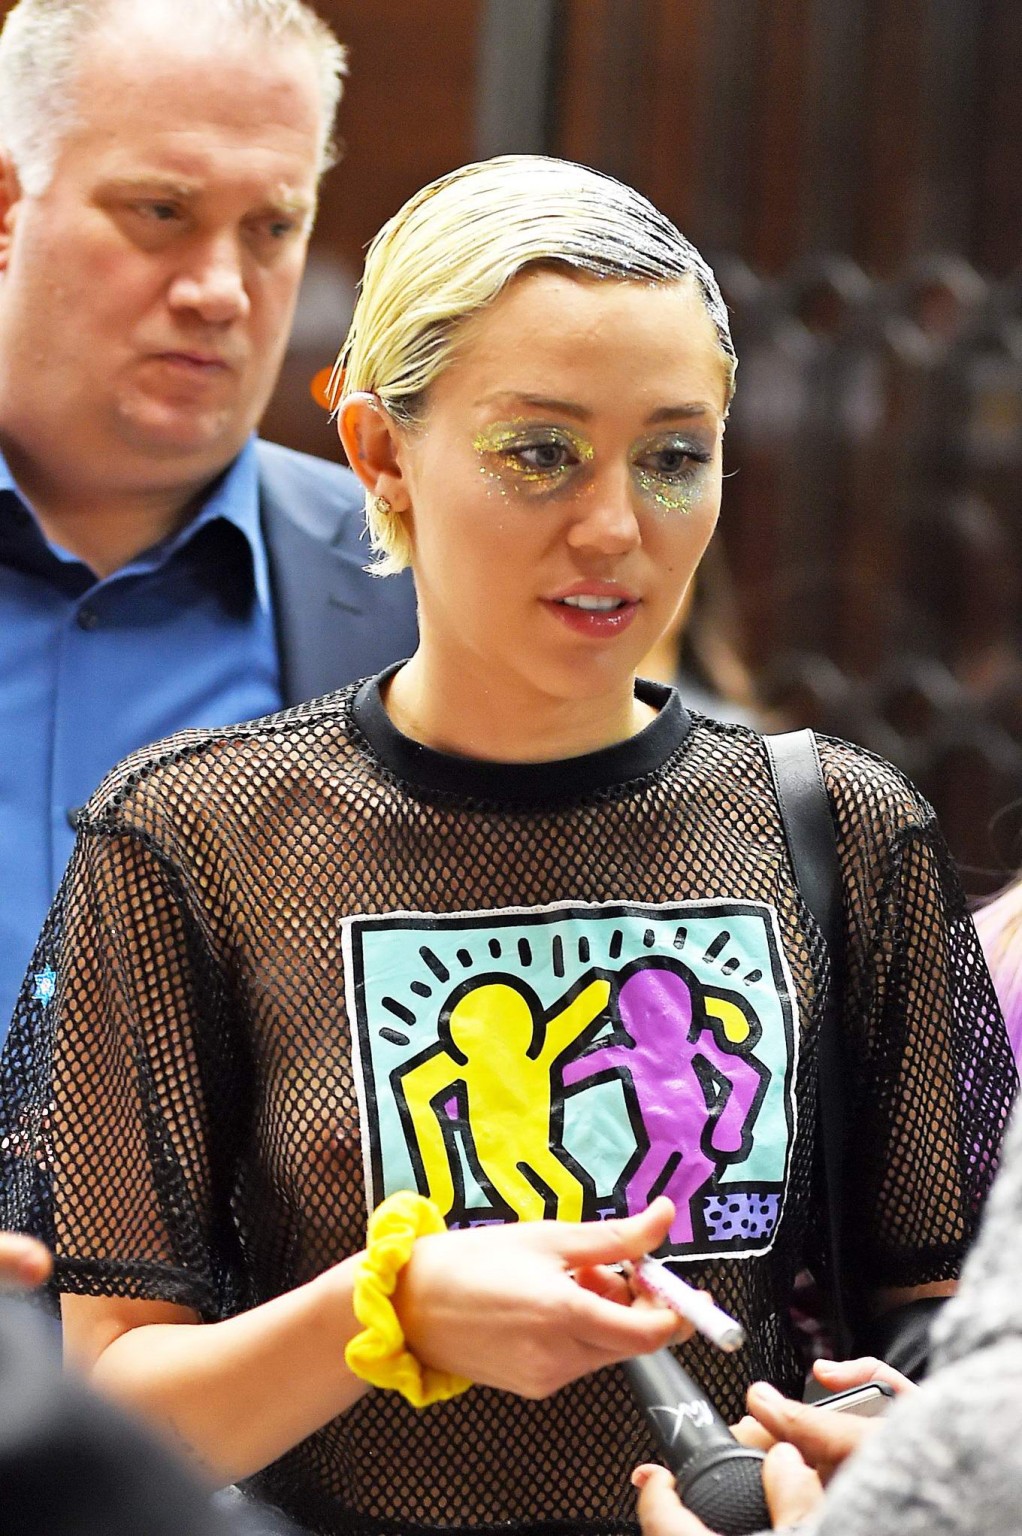 Miley Cyrus shows off her boobs wearing a mesh Tshirt out in NYC #75164271